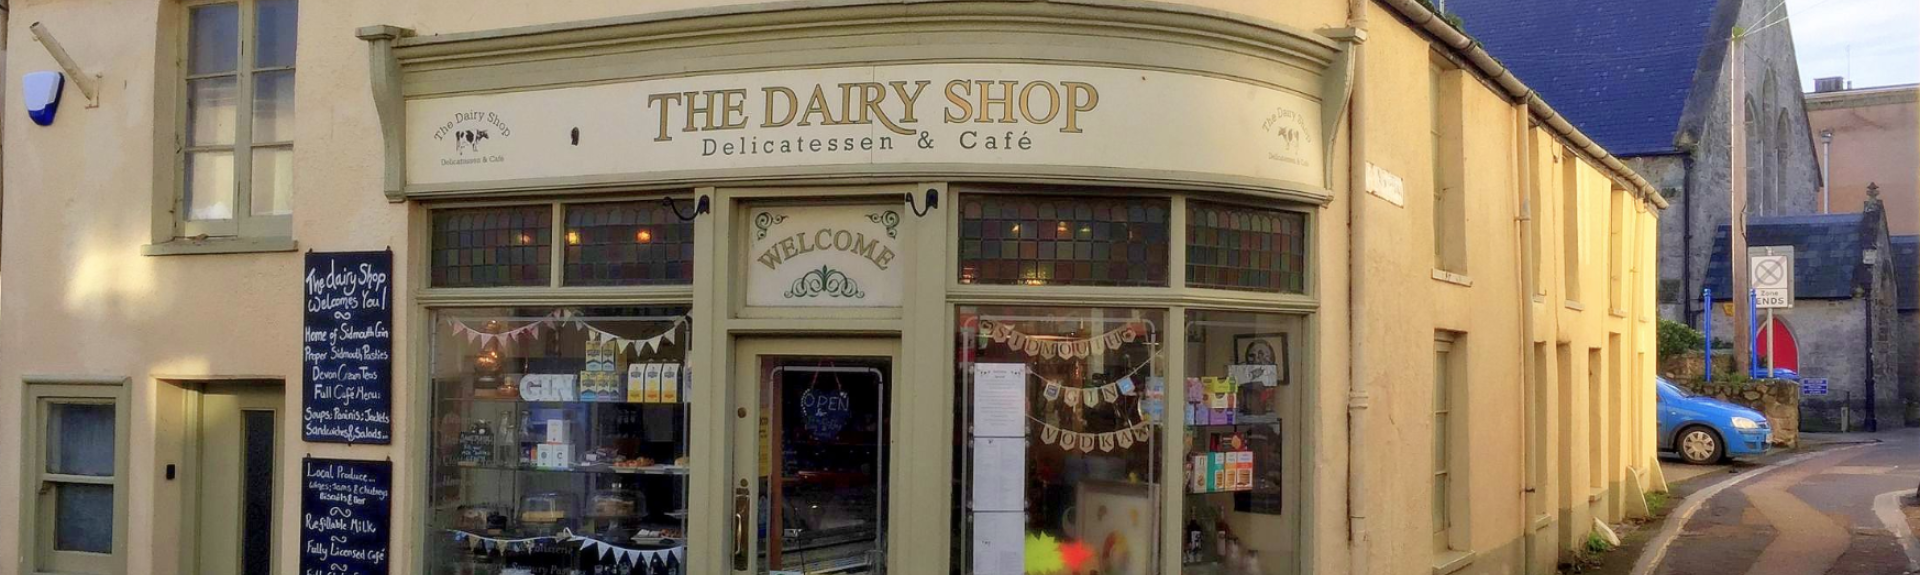 The shop front for The Dairy Cafe in Sidmouth with large windows displaying local produce.